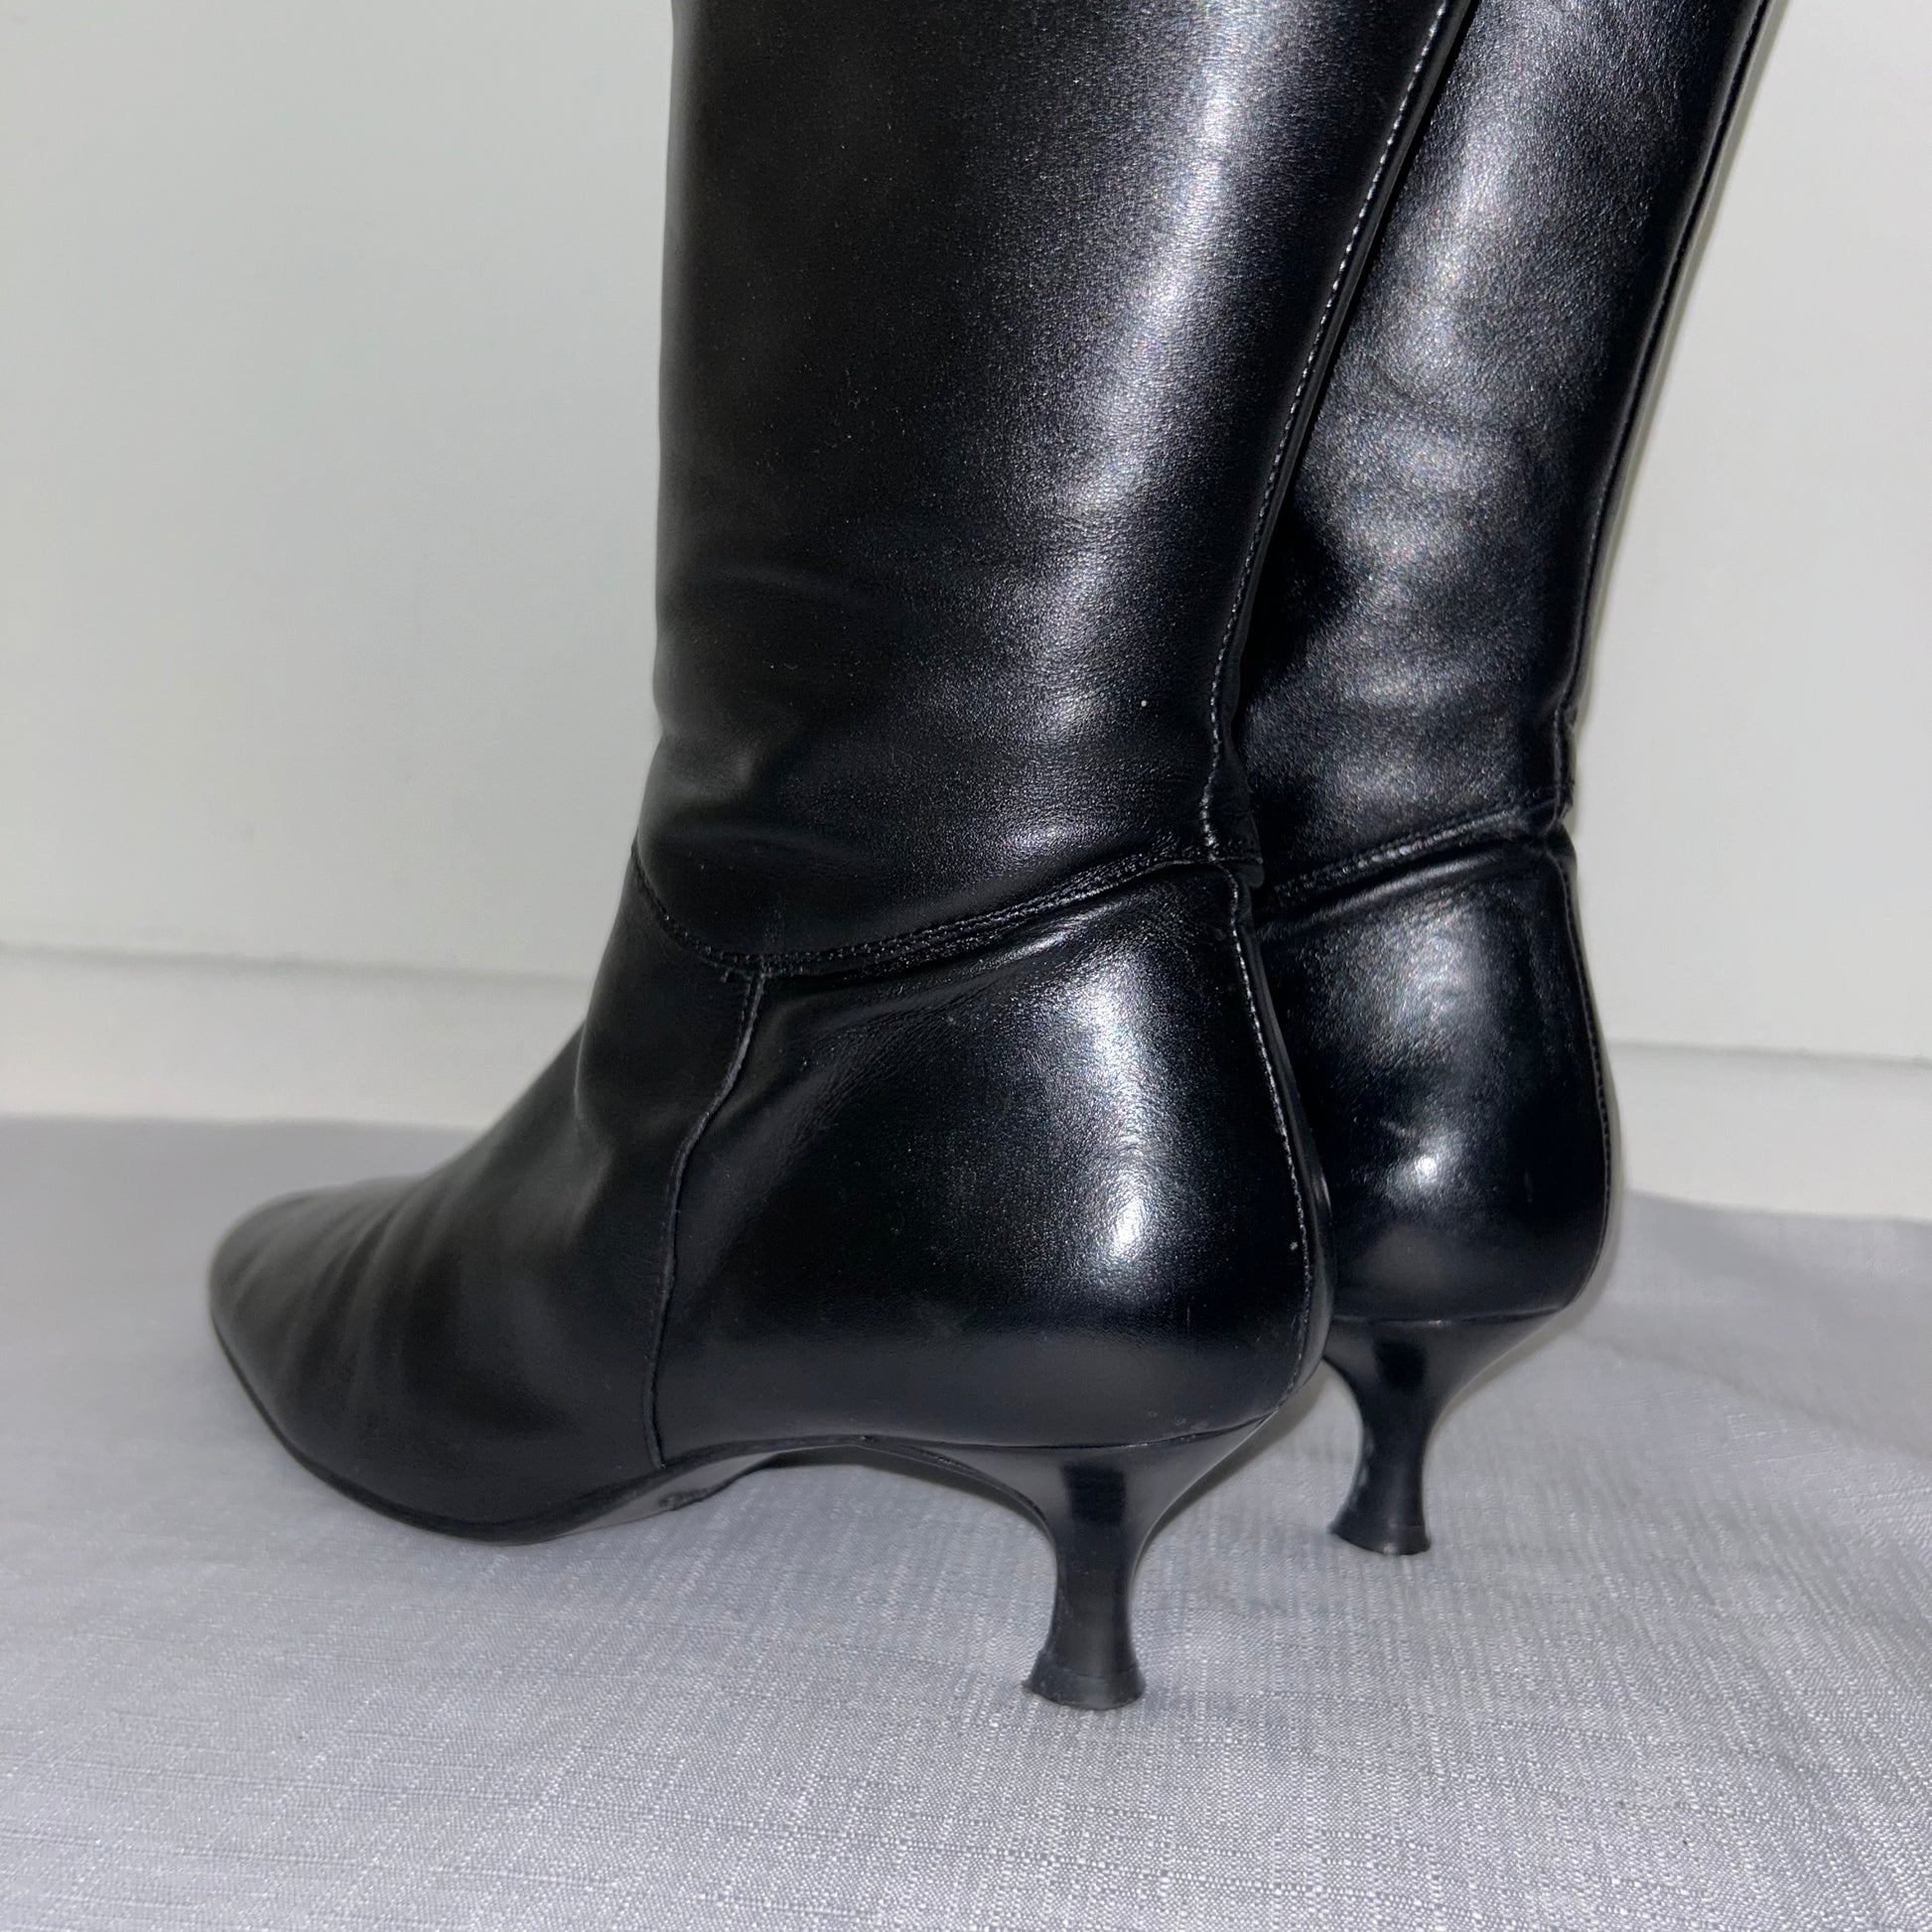 heels of black knee high boots shown on a white background